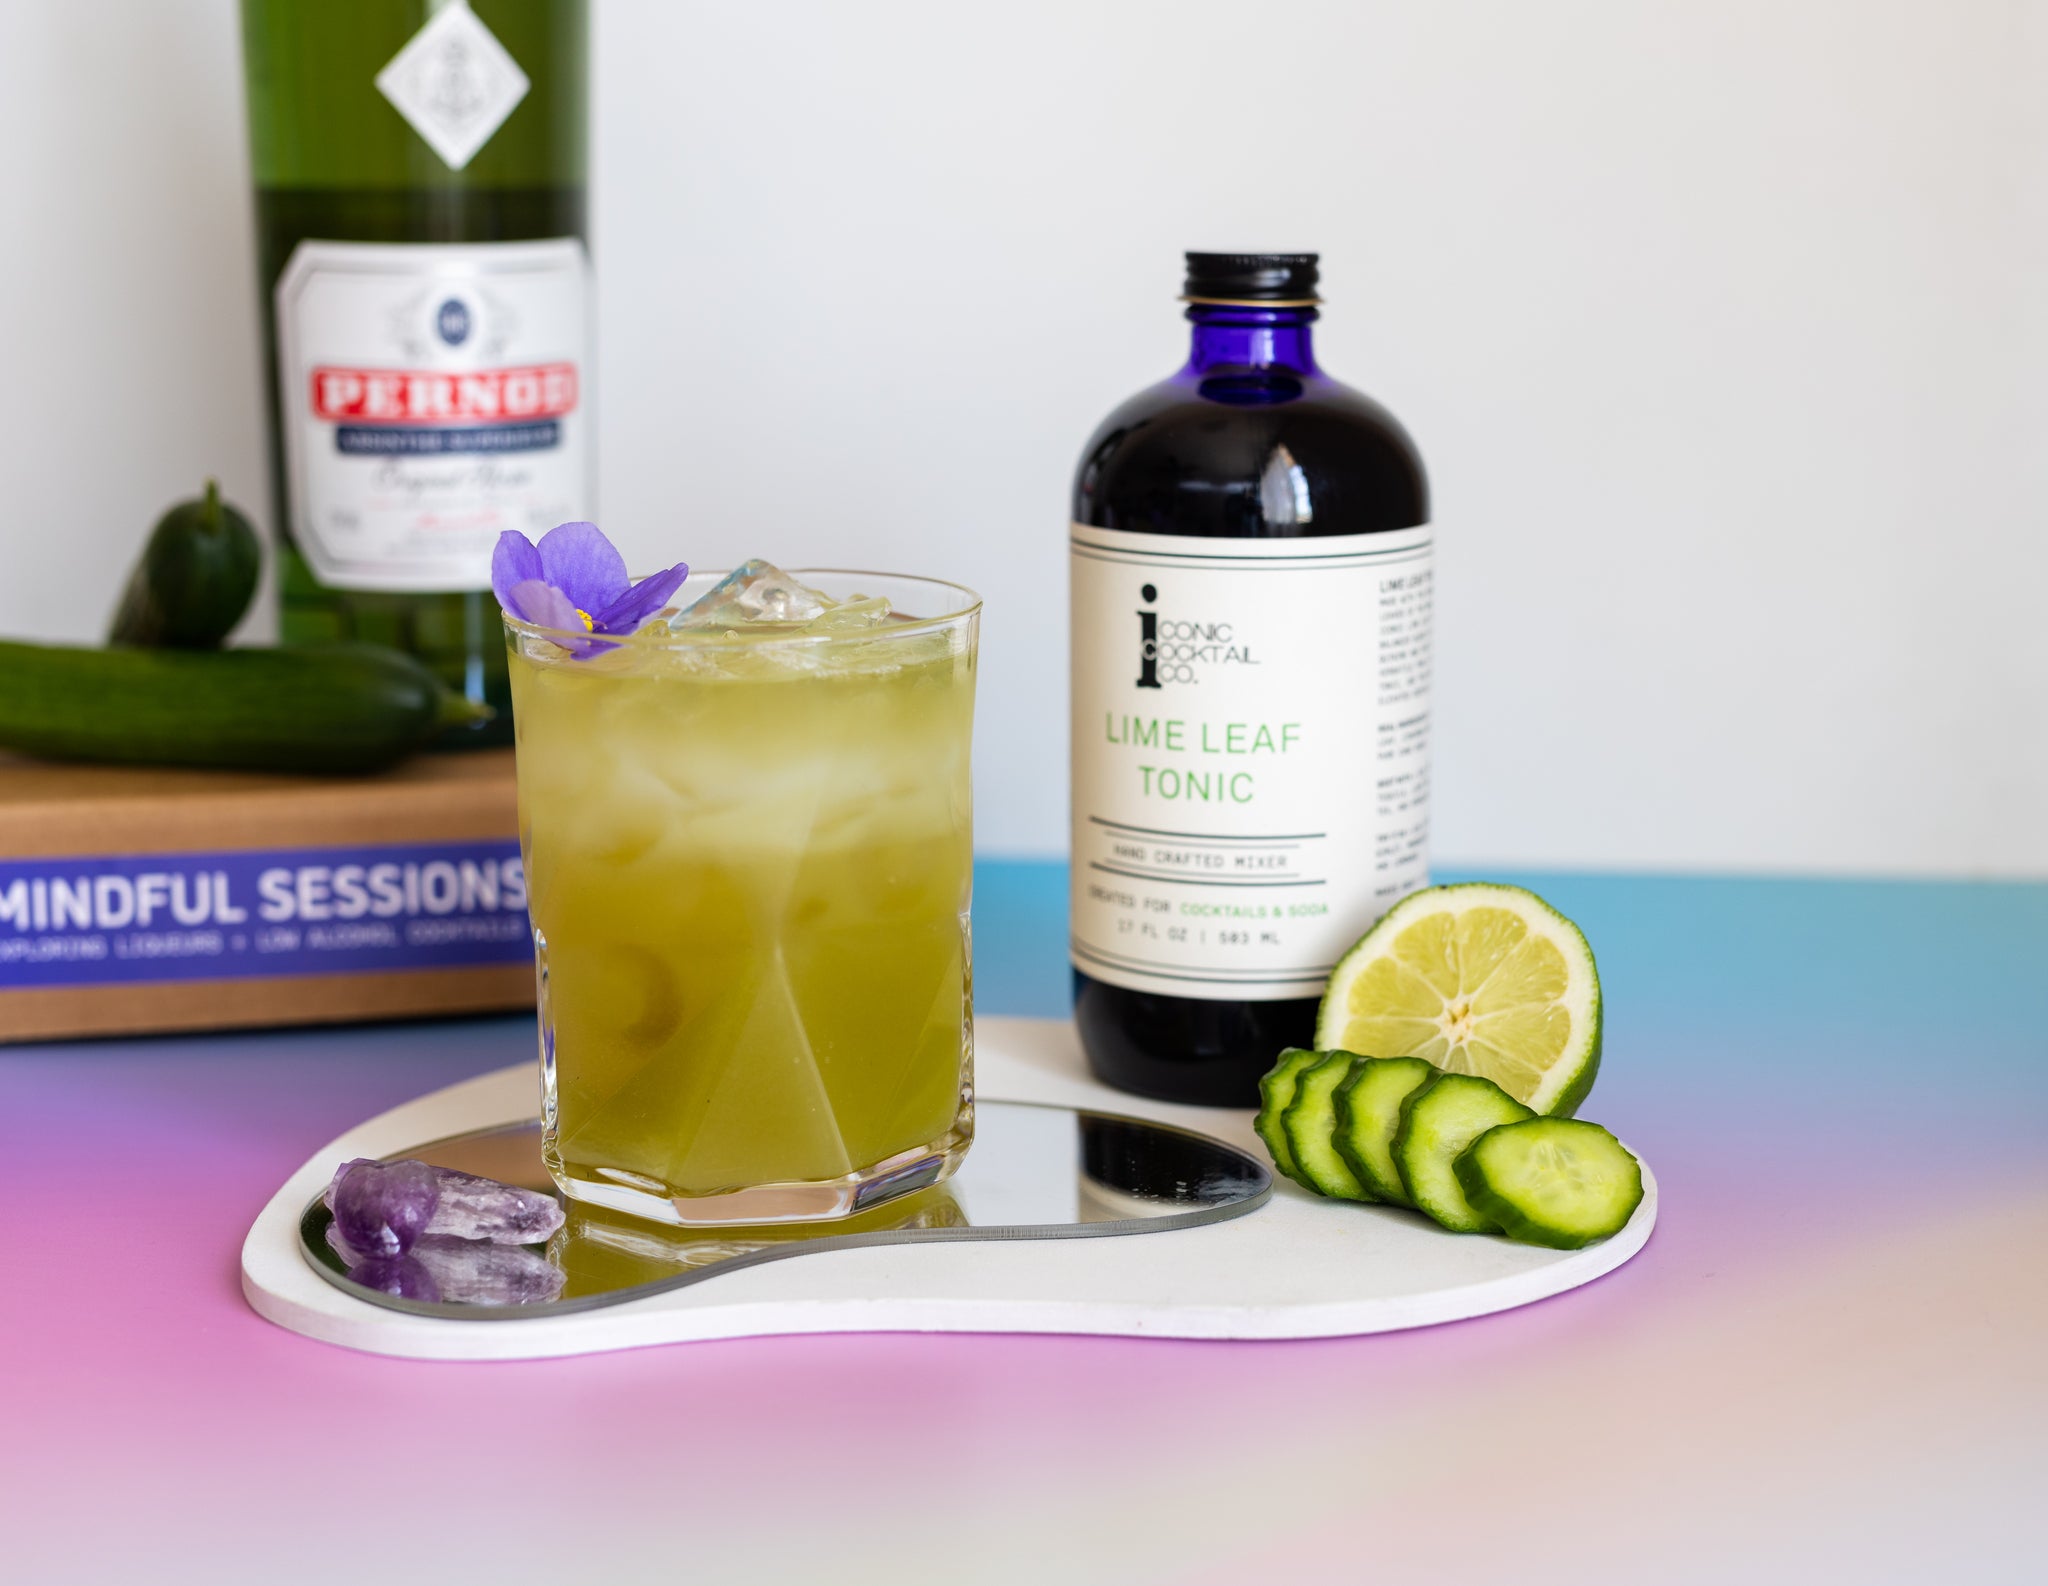 Inspired by the La Fee Verte or Green Fairy this session cocktail is designed to be intentionally low-abv. Perfect for summer, the combination of fresh cucumber juice and herbaceous Iconic Lime Leaf Tonic pairs with this bitter anise liqueur. 